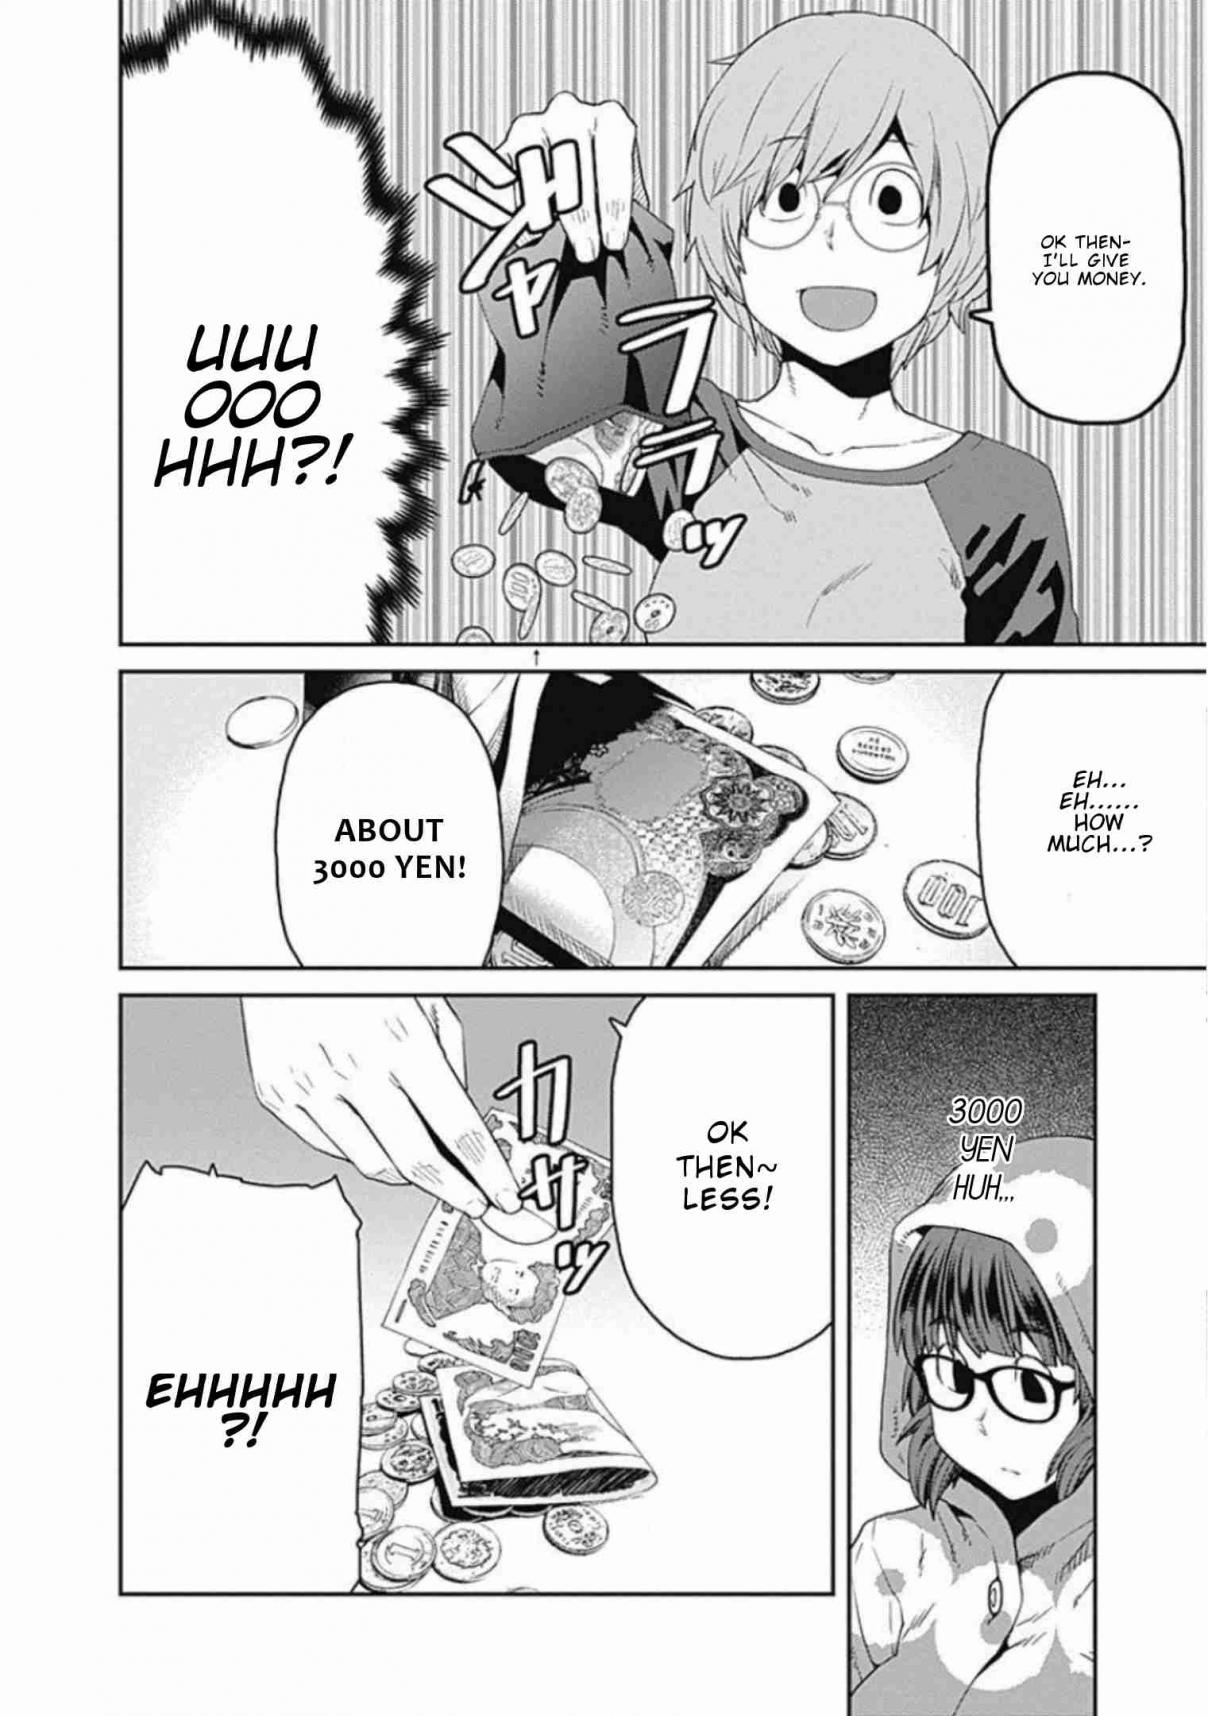 67% Inertia Vol. 6 Ch. 58 A girl who wishes to touch anything